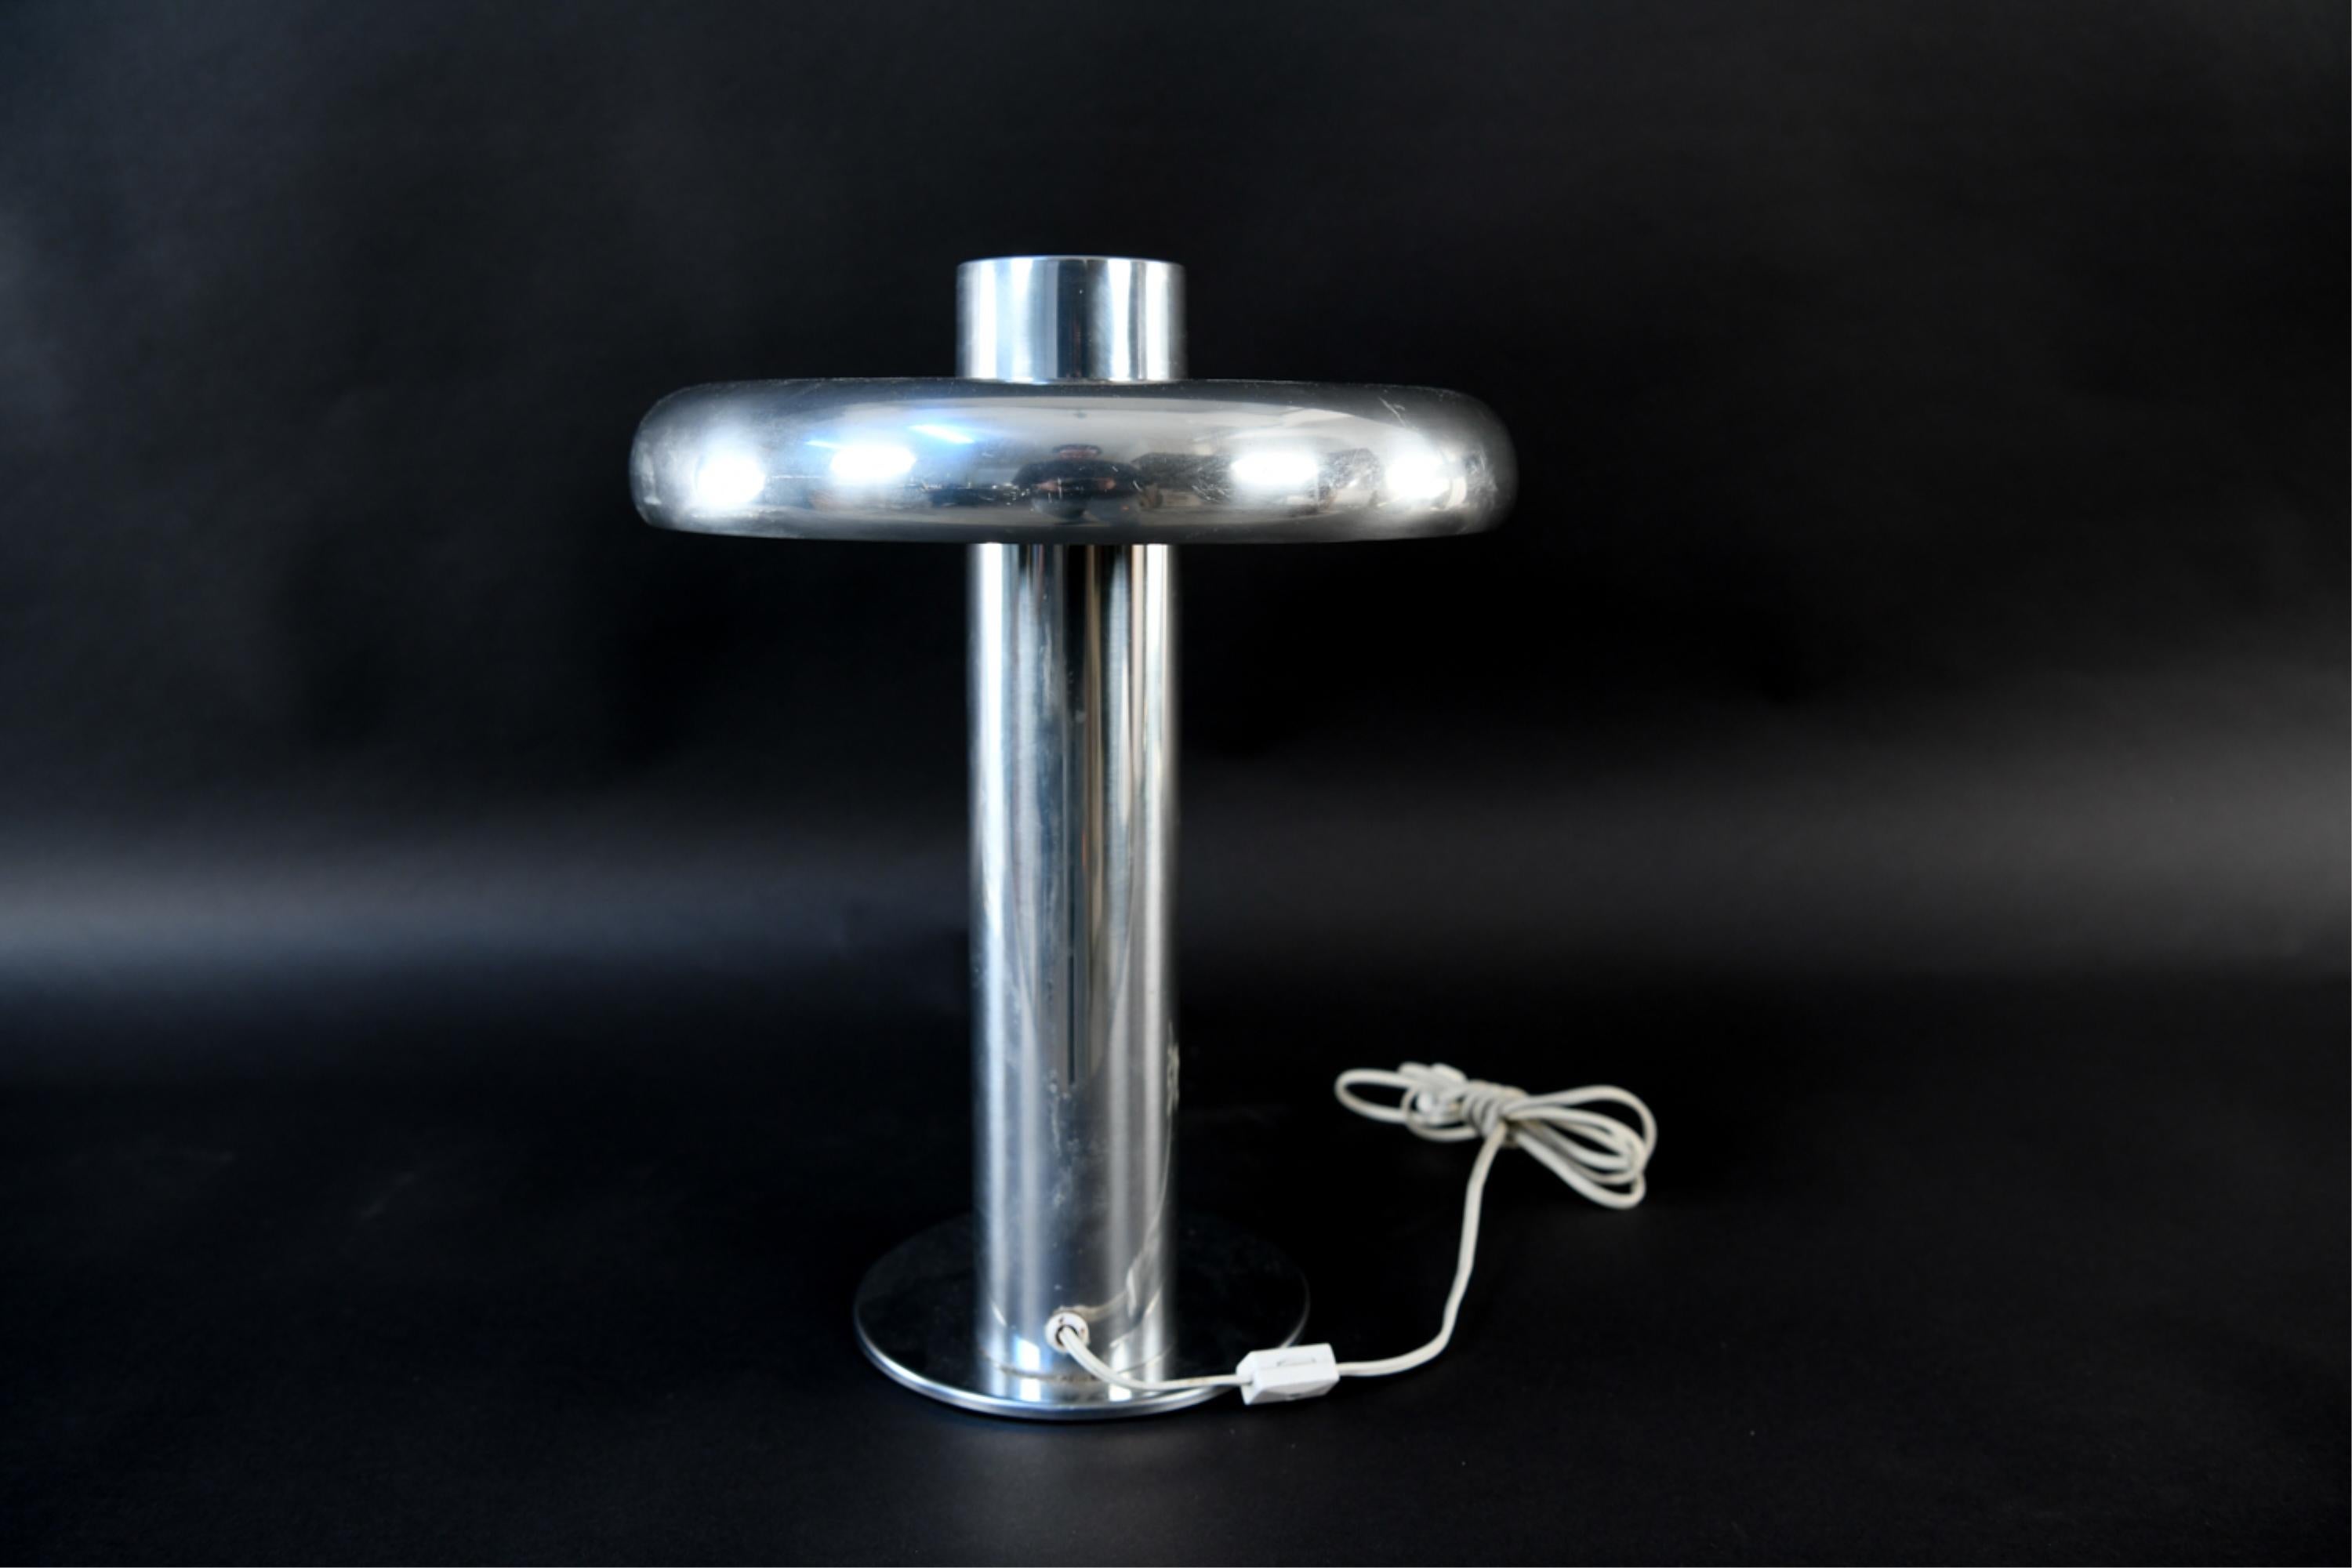 An excellent Space Age-inspired chrome table lamp with a cylinder base, offset saucer shade, and fluorescent tube bulb. Inspired by the Scandinavian style of Robert Sonneman and George Kovacs, this lamp really pops!